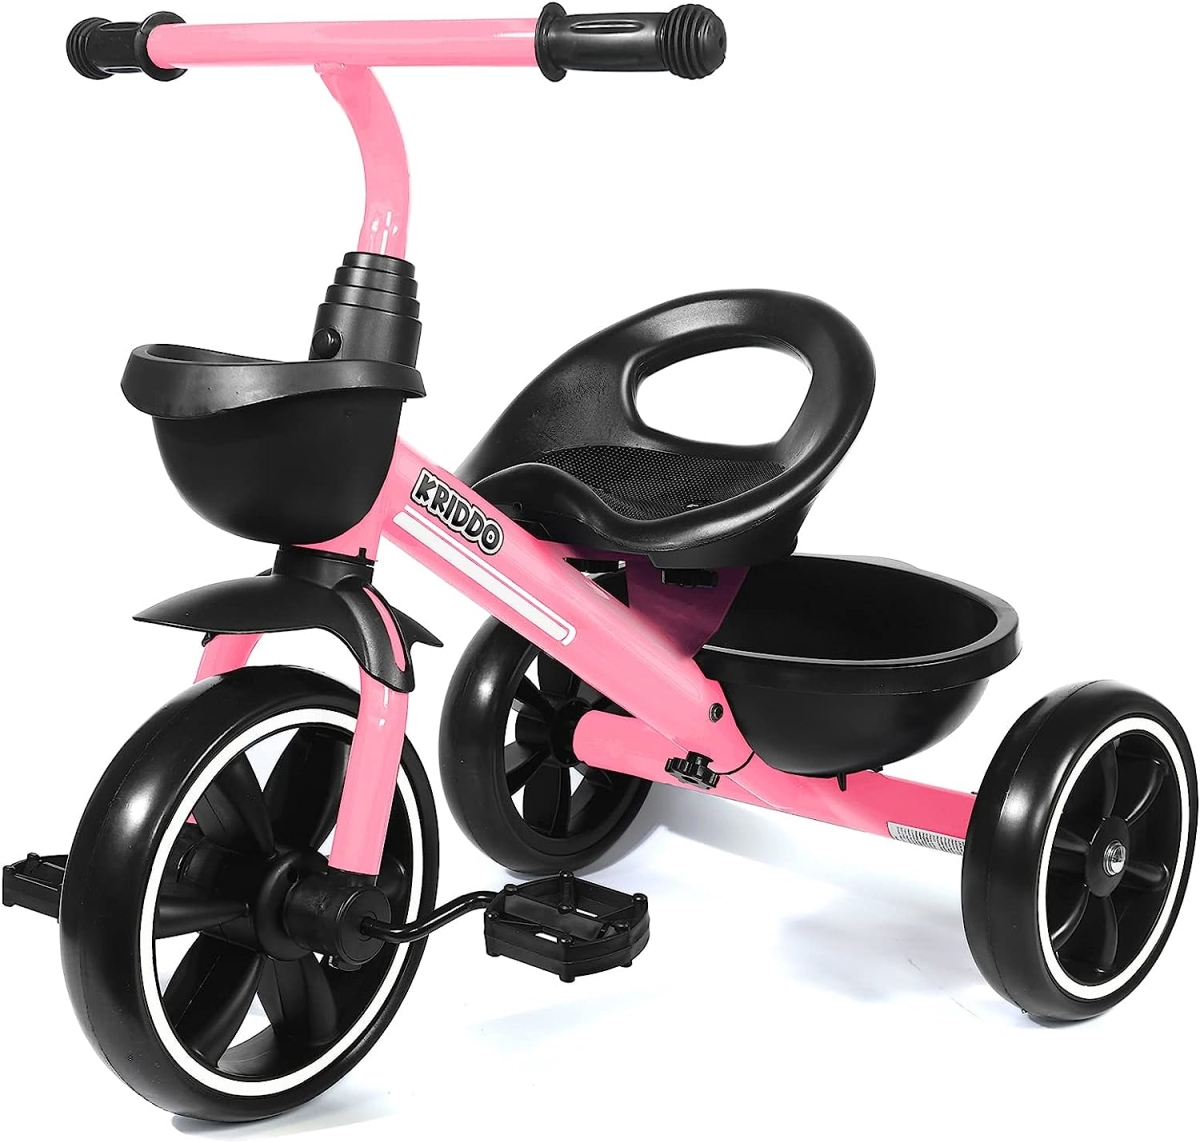 KRIDDO TC003-Pink KRIDDO Kids Tricycles Age 24 Month to 4 Years&#44;Gift Toddler Trike for 2.5 to 5/ 2-4 Year Olds&#44; Pink